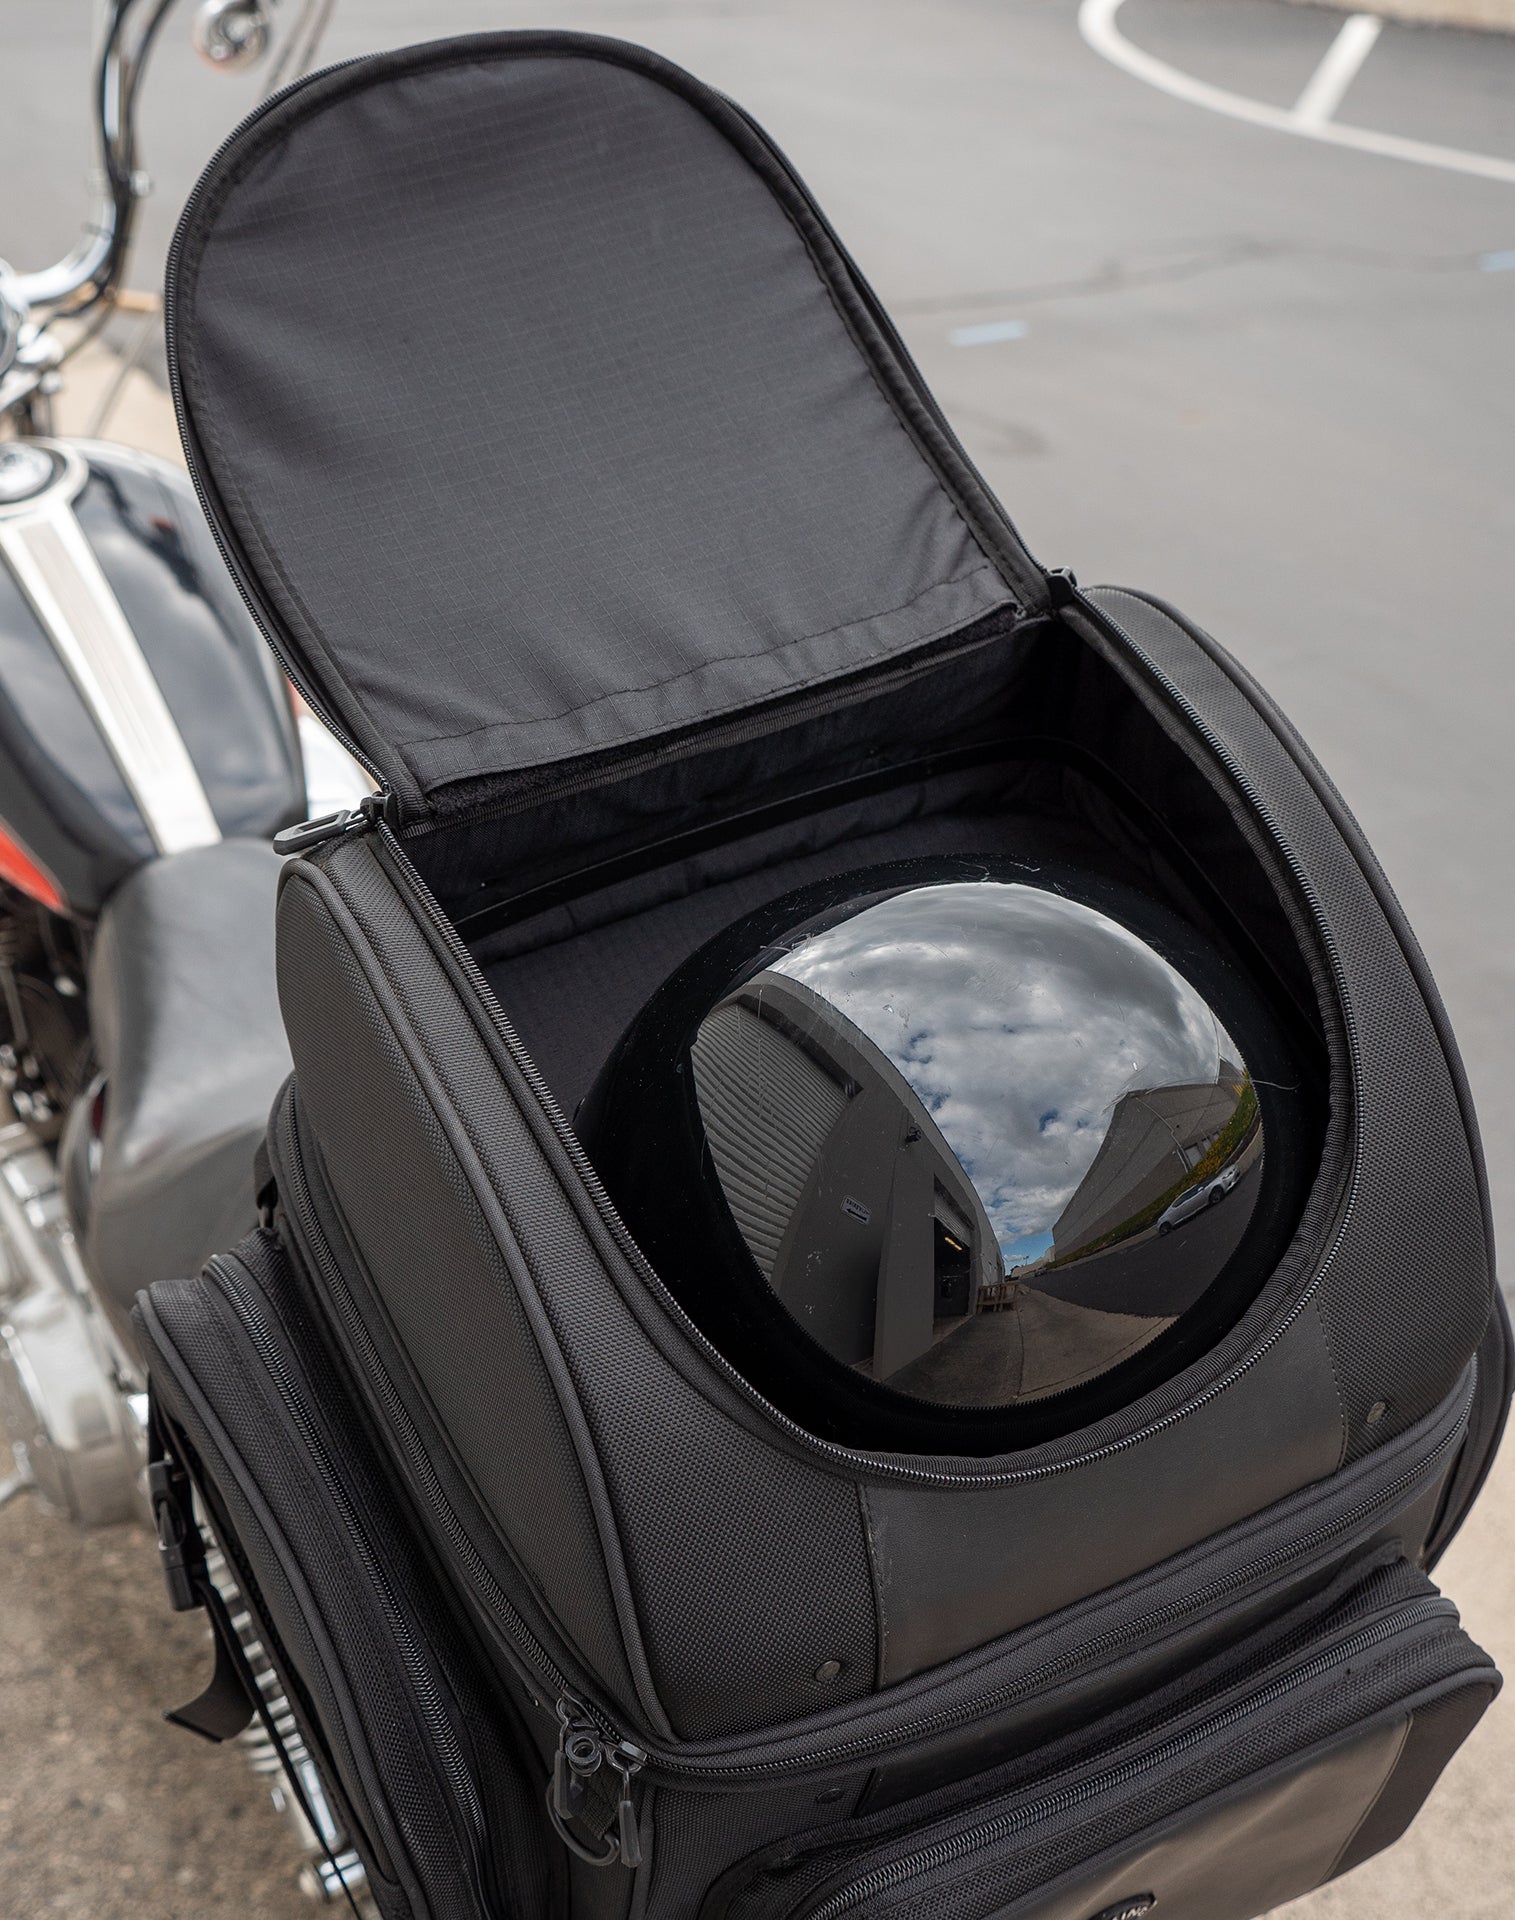 52L - Galleon XL Victory Motorcycle Tail Bag